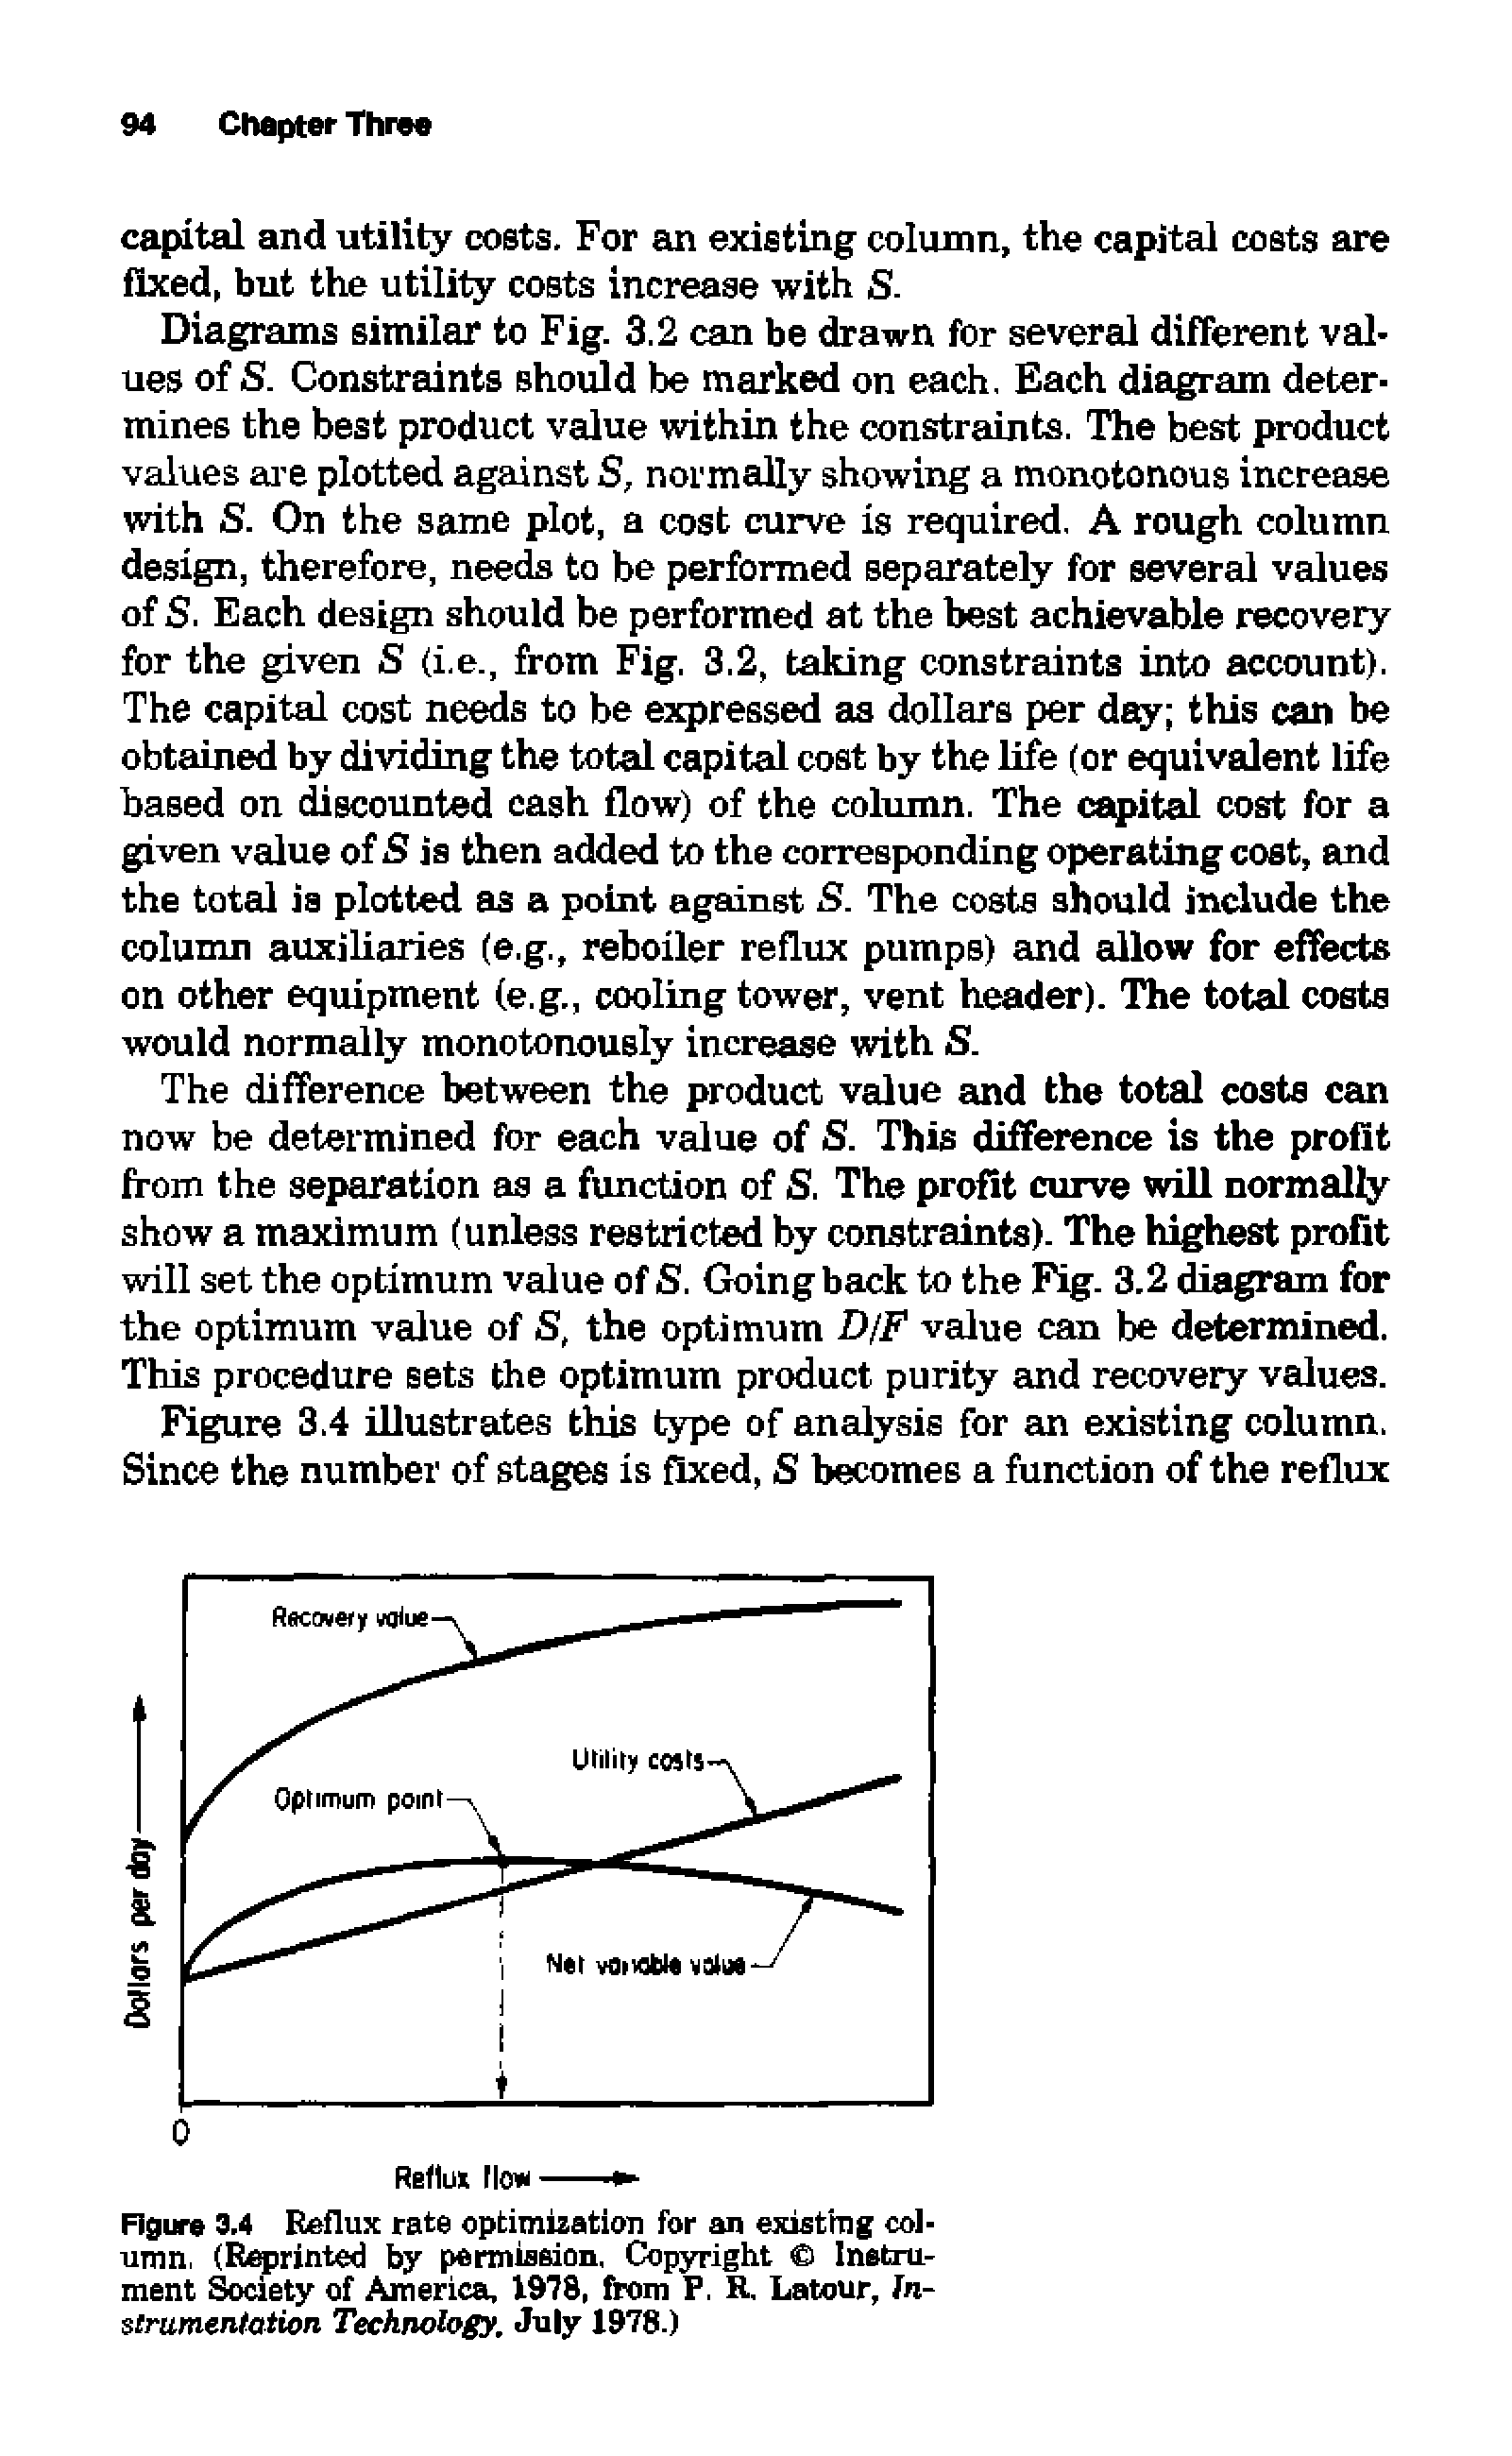 Figure 3.4 Reflux rate optimization for an existing column, (Reprinted by permission, Copyright Instrument Society of America, 1978, from P. R. Latour, instrumentation Technology. July 1978.)...